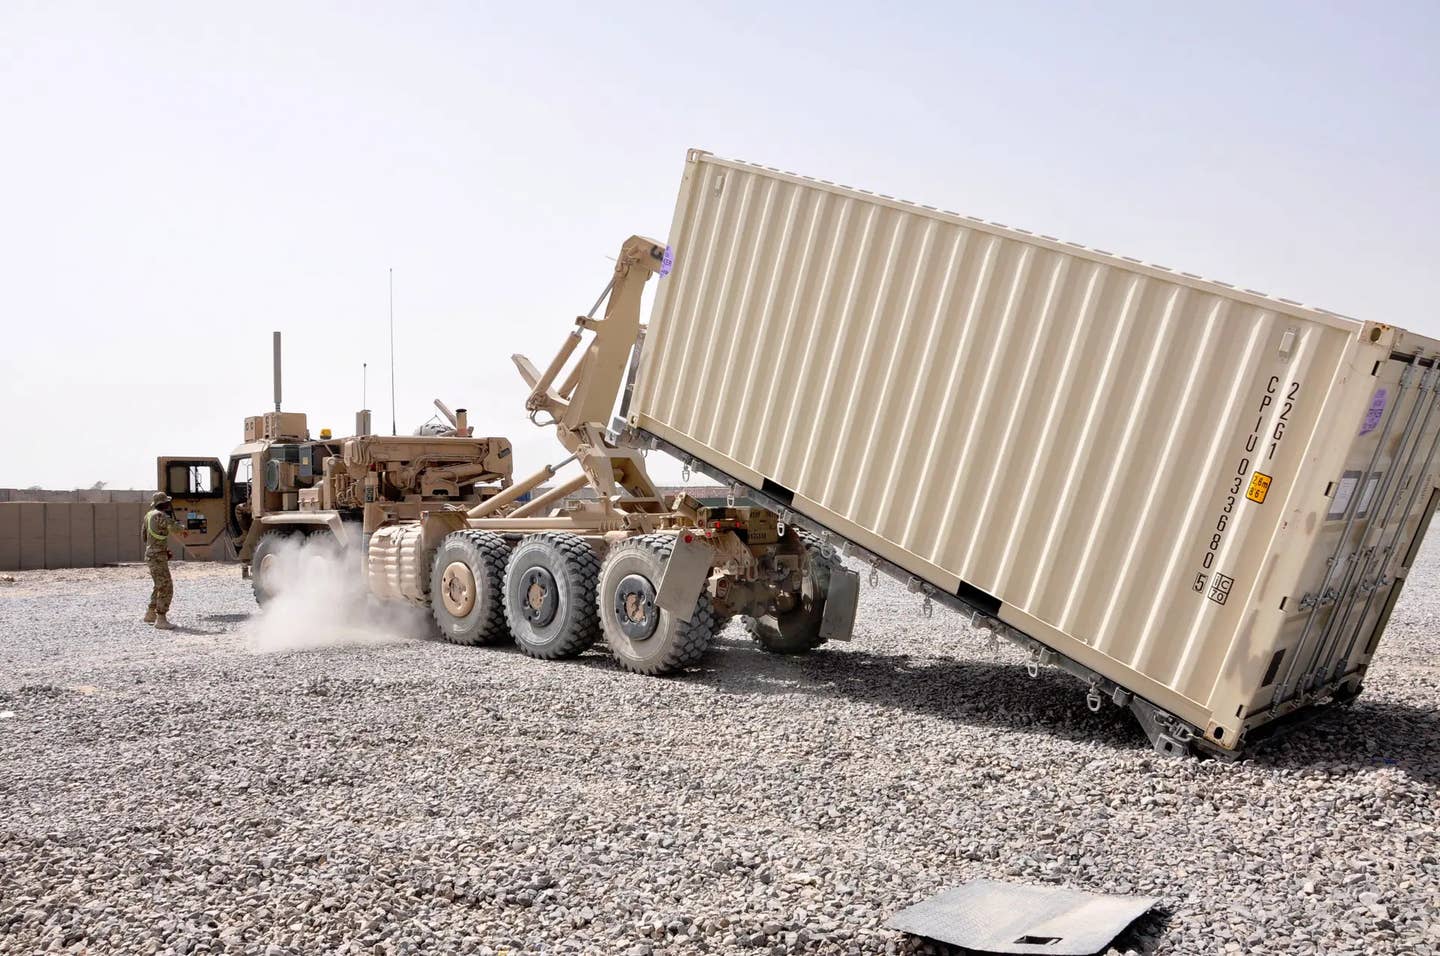 Standardized equipment for moving containers like the US Army M1074 Palletized Load System truck seen here could be used to readily move Containerized Weapon Systems in the counter-drone configuration from one location to another. <em>US Army</em>